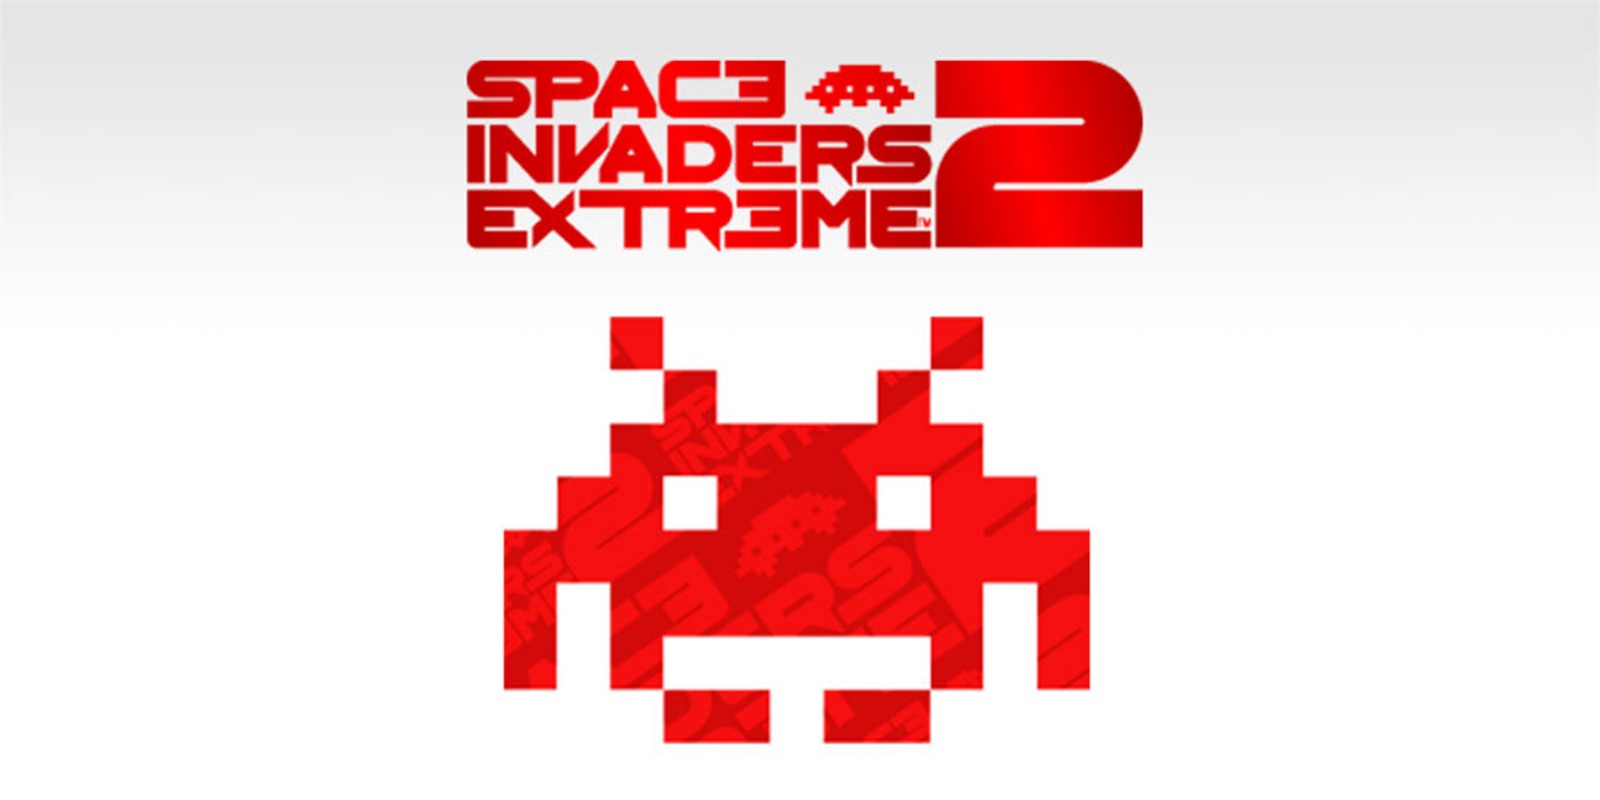 Space Invaders Extreme 2 (輸入版) - ニンテンドーDS